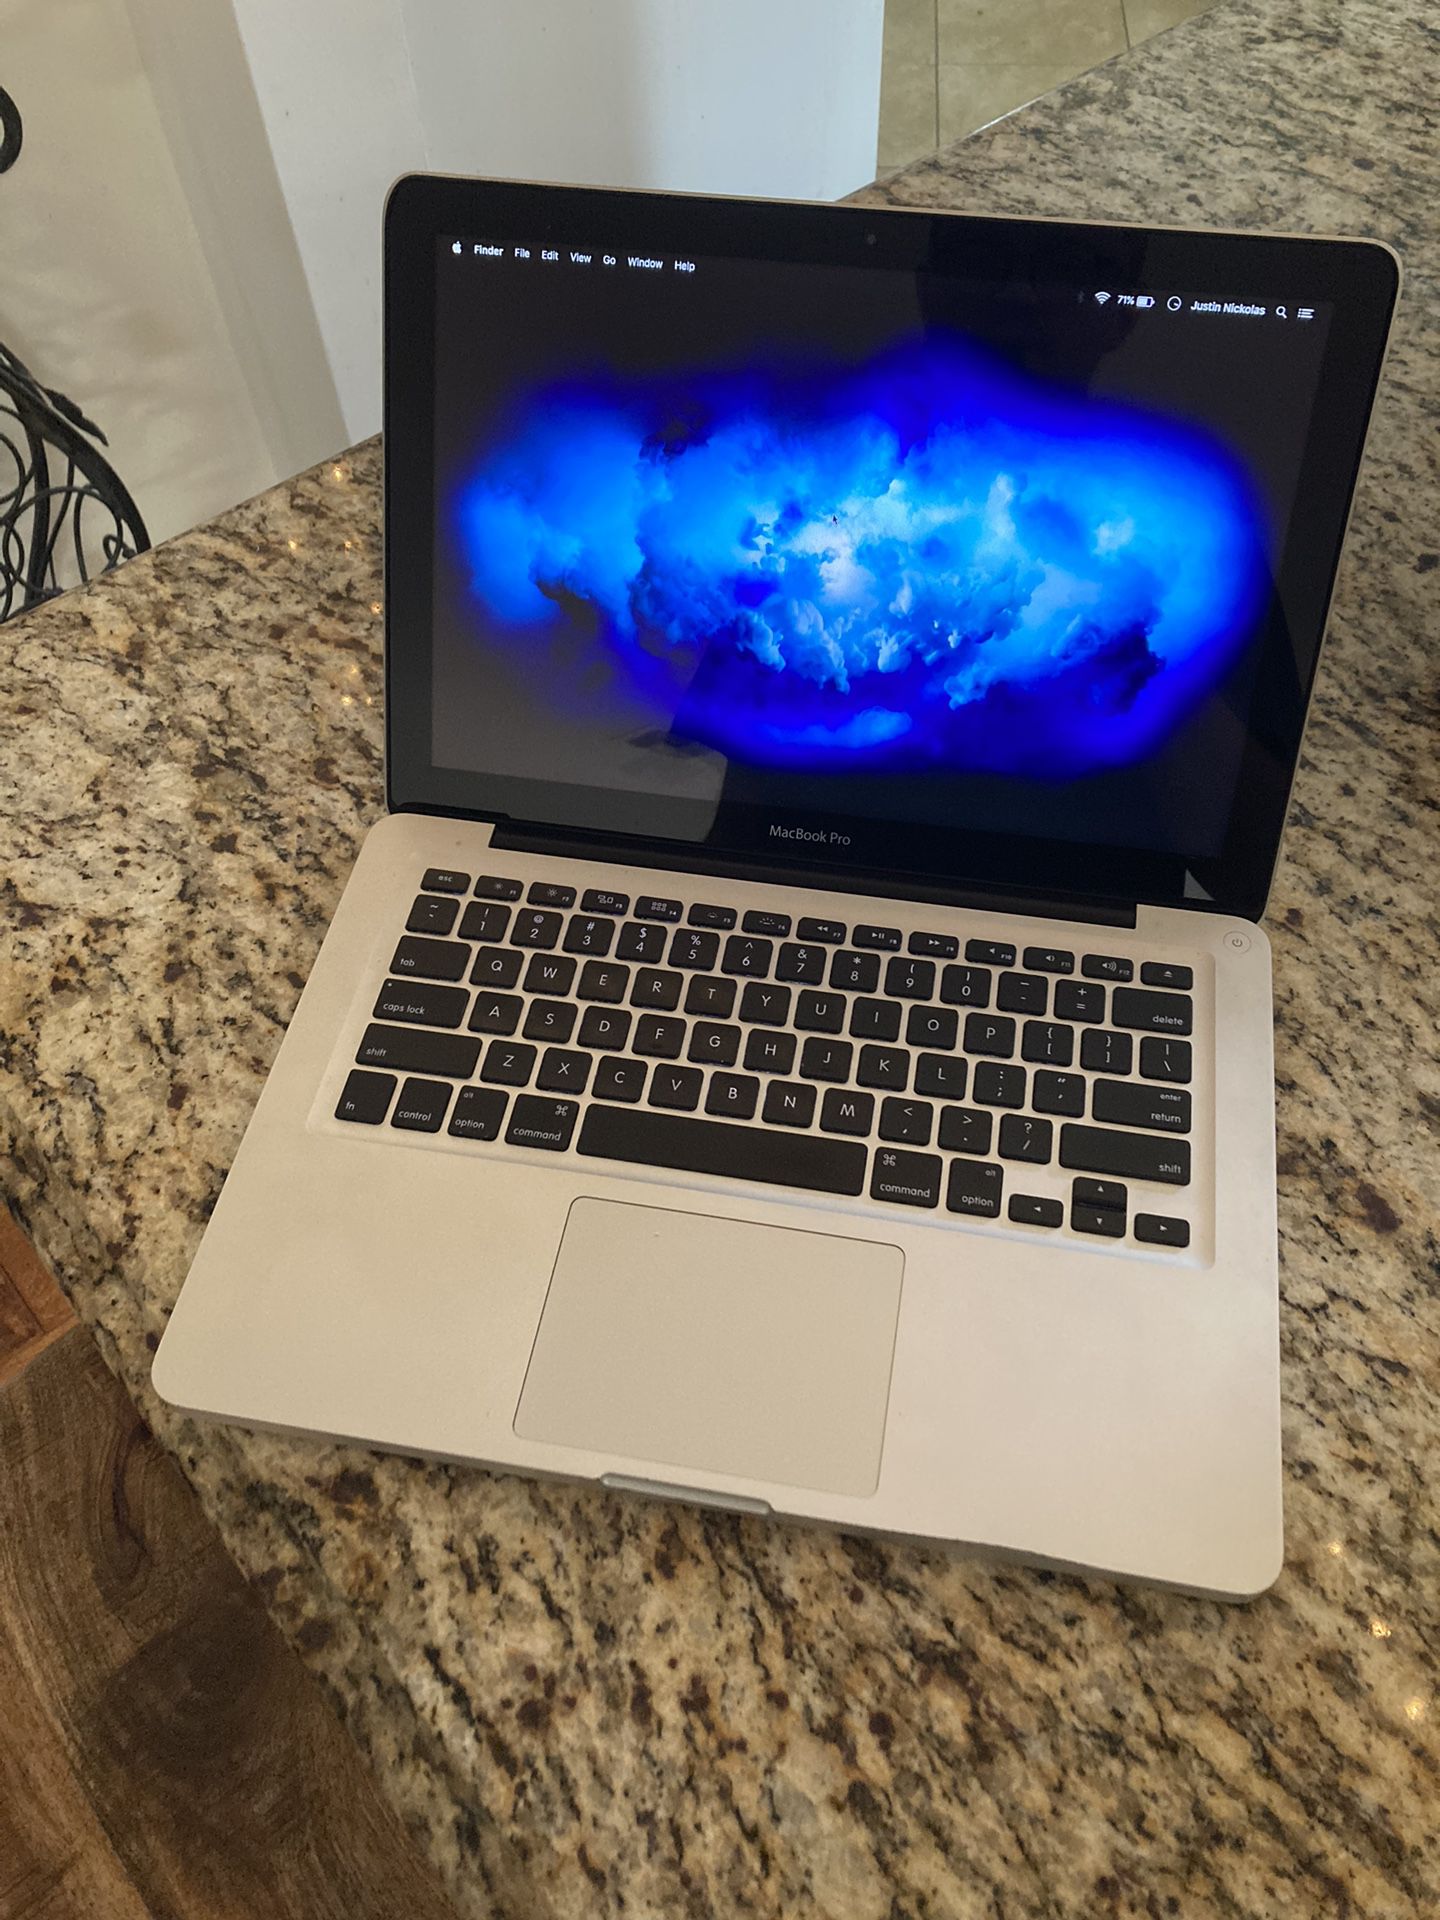 MacBook Pro i7 2.7ghz 13in. (early 2011) I